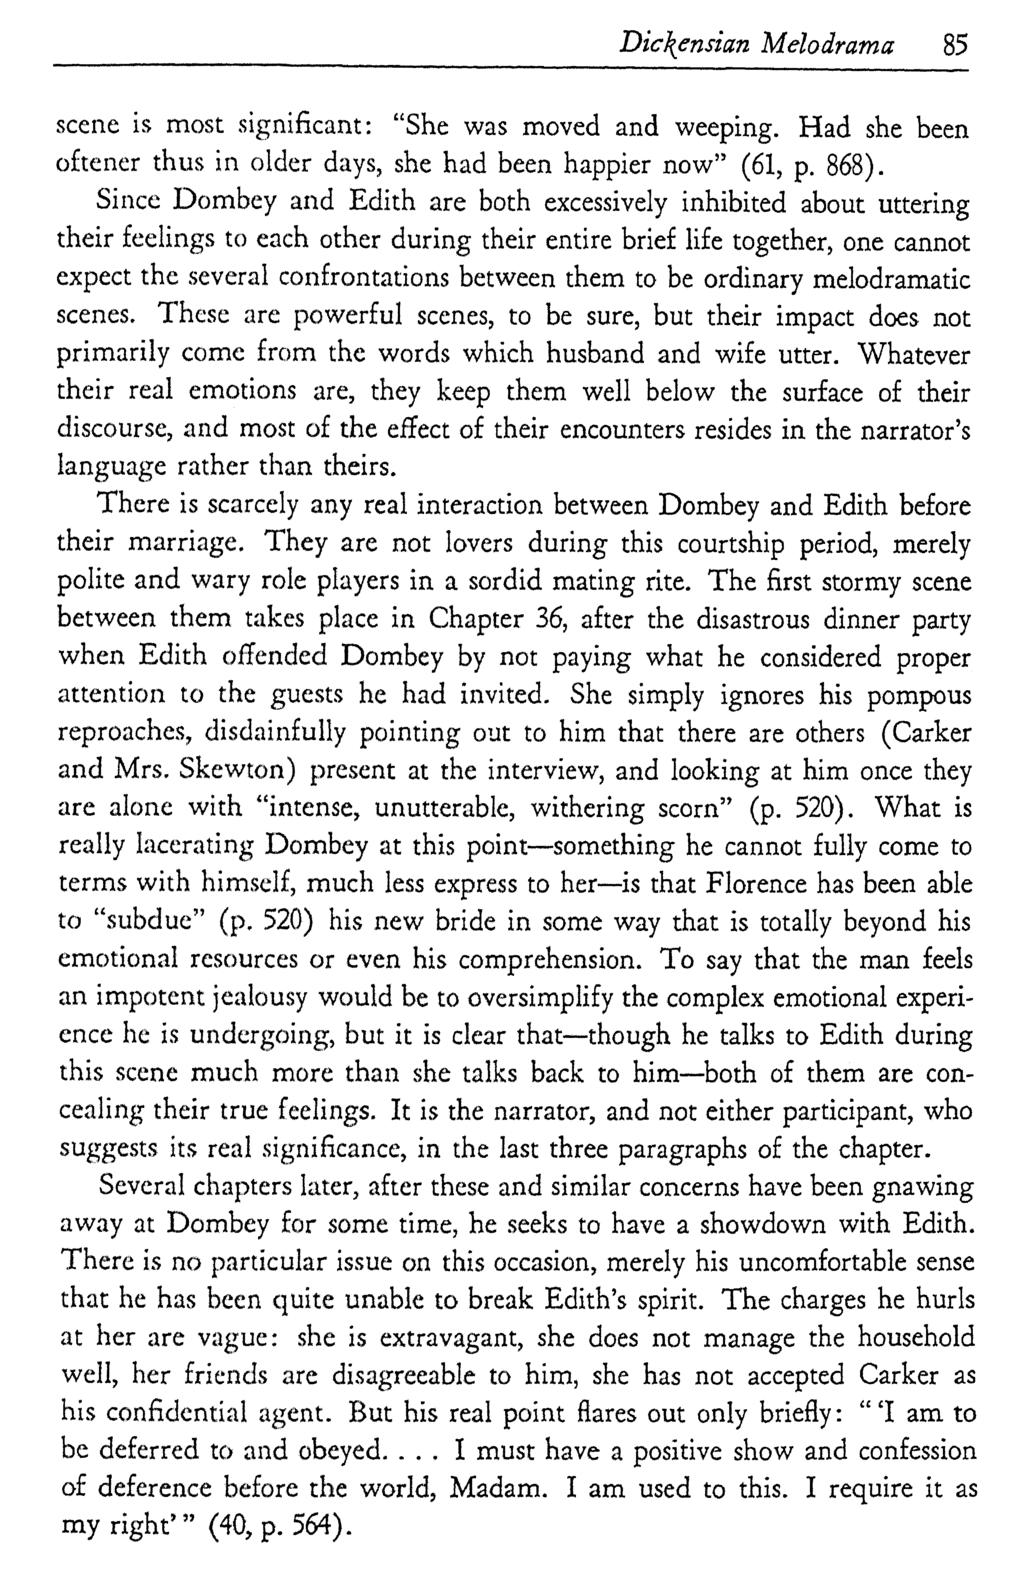 Dic\ensian Melodrama 85 scene is most significant: "She was moved and weeping. Had she been oftener thus in older days, she had been happier now" (61, p. 868).